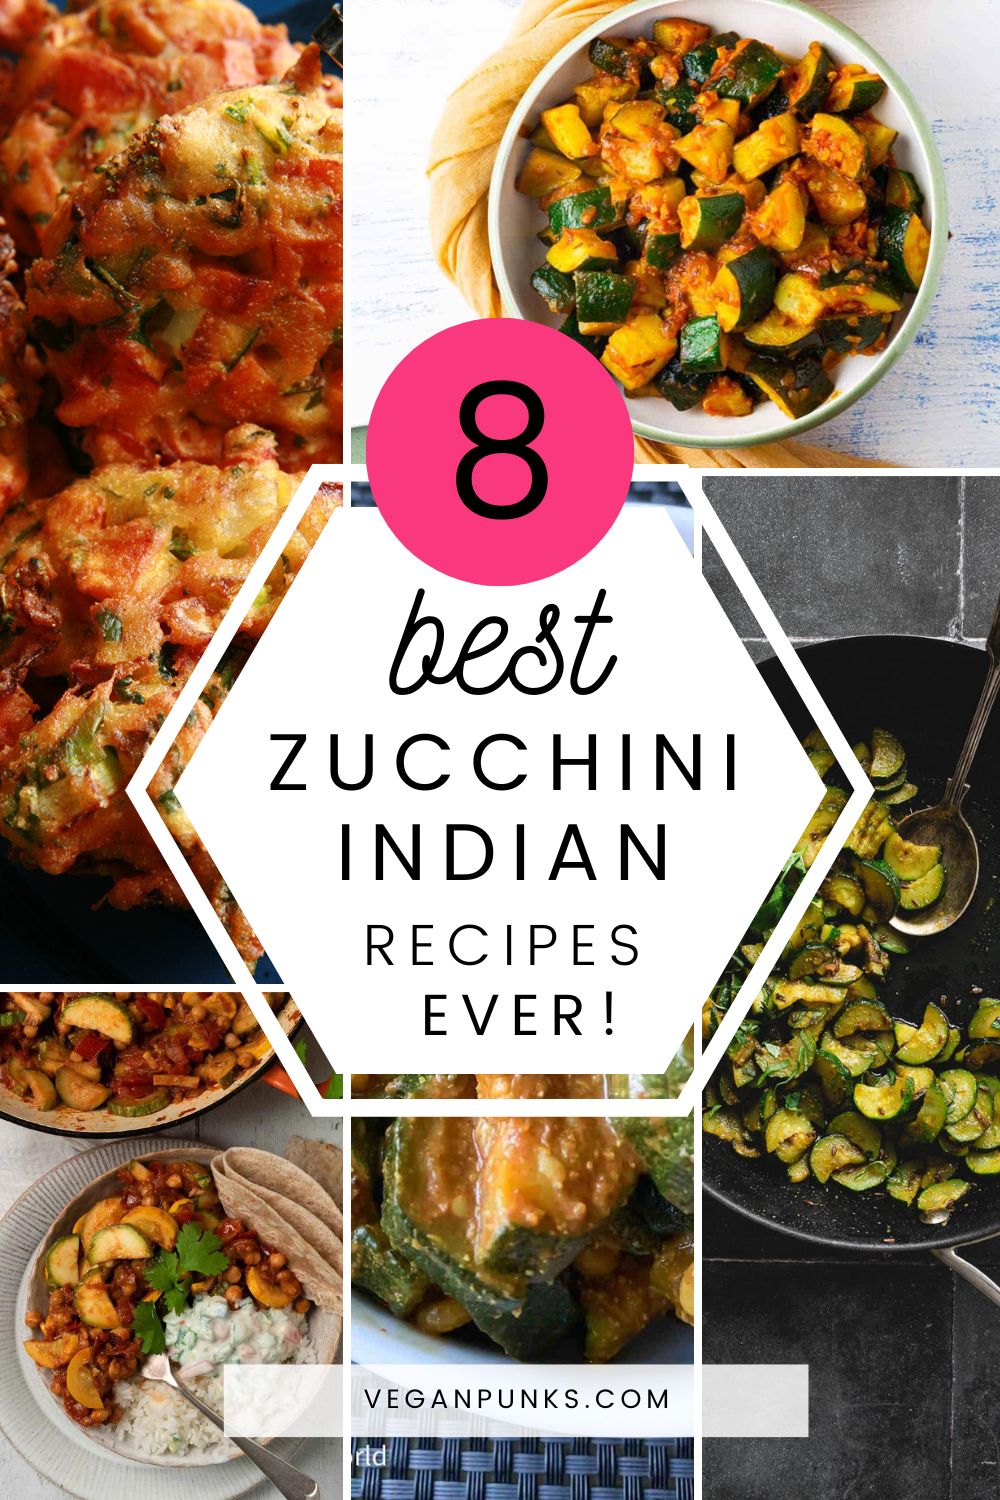 Best Indian Zucchini Recipes pin with a collage of recipes shown.